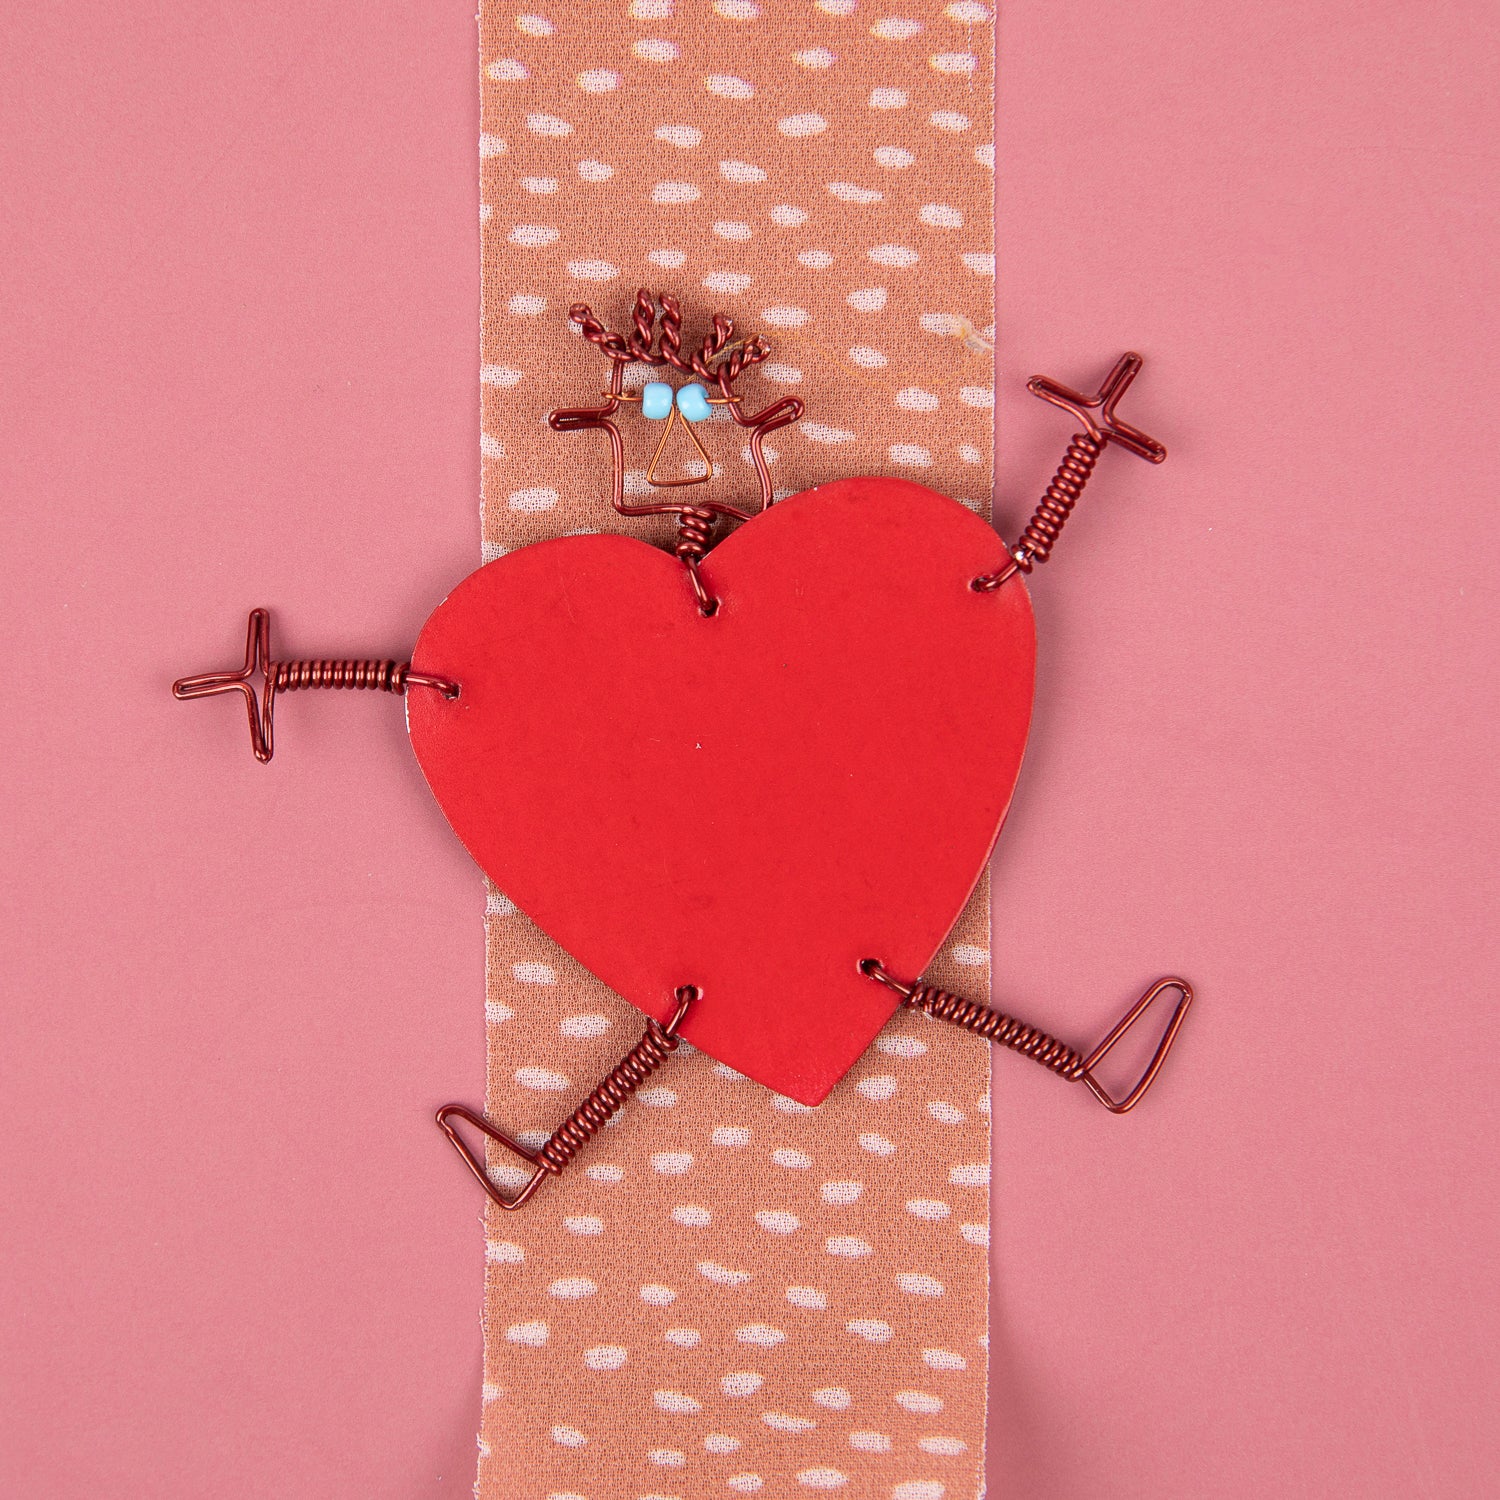 Recycled Heart Pin by Global Crafts